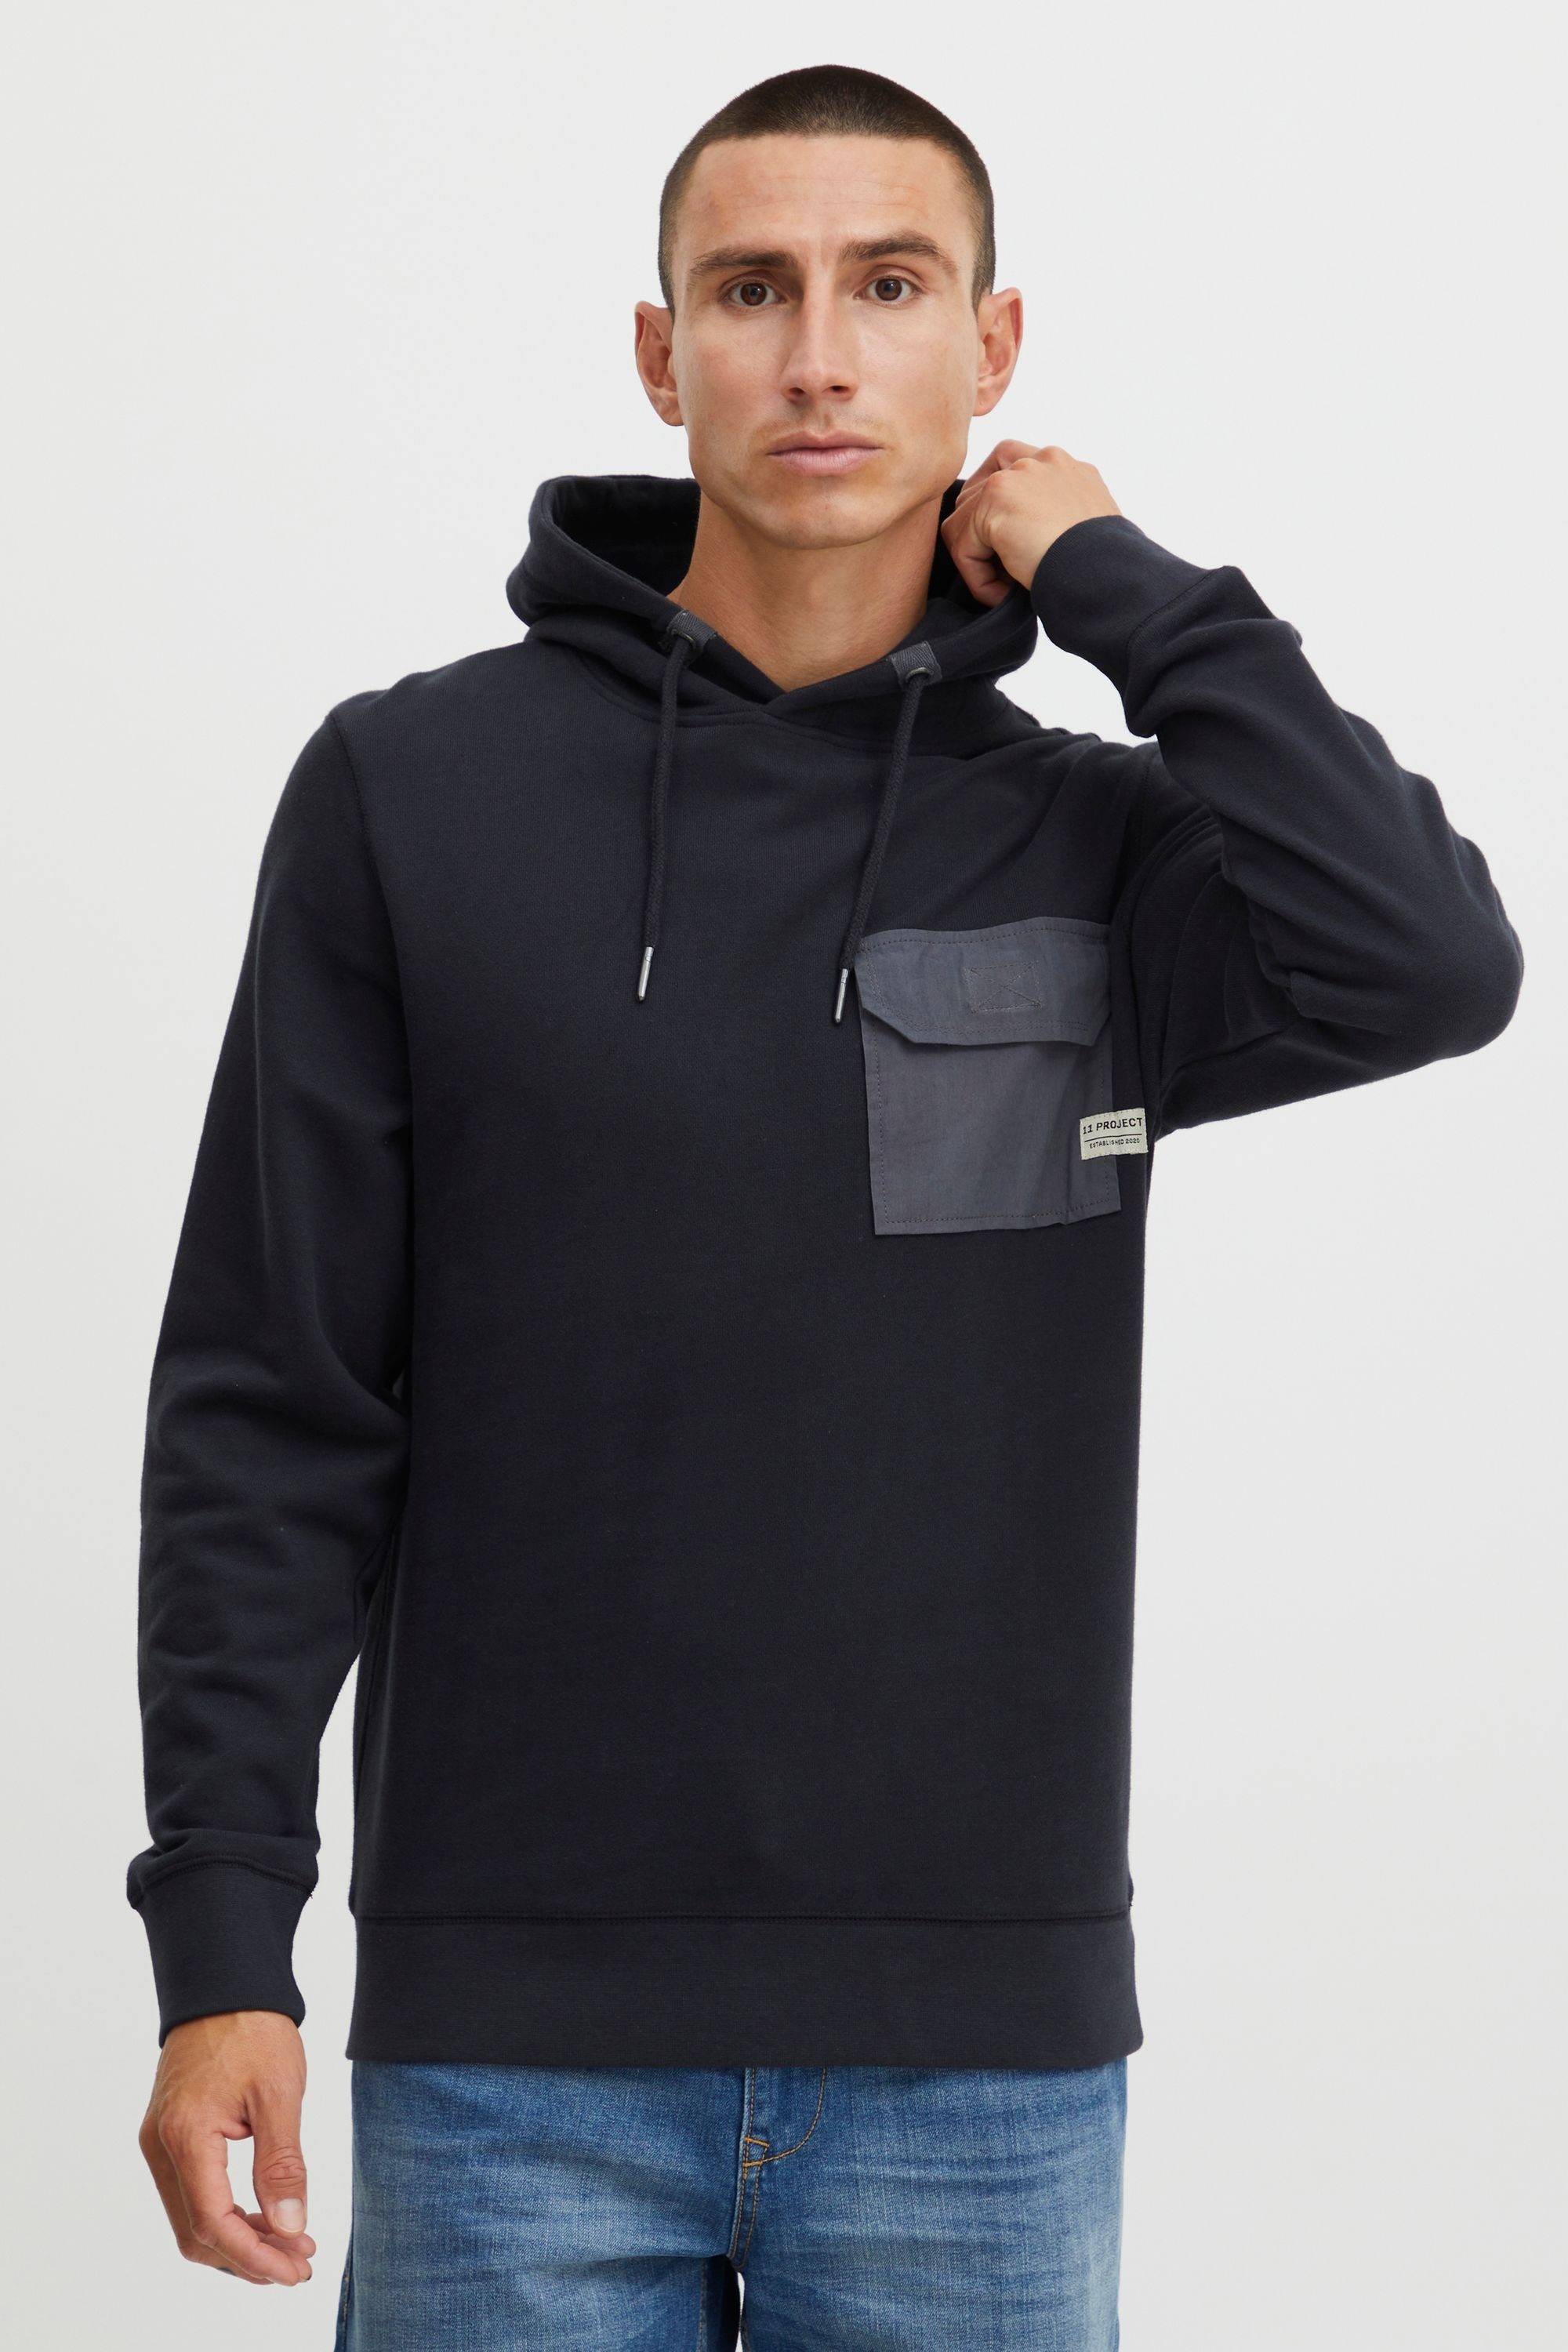 11 11 Project Project Hoodie PRPelo Black